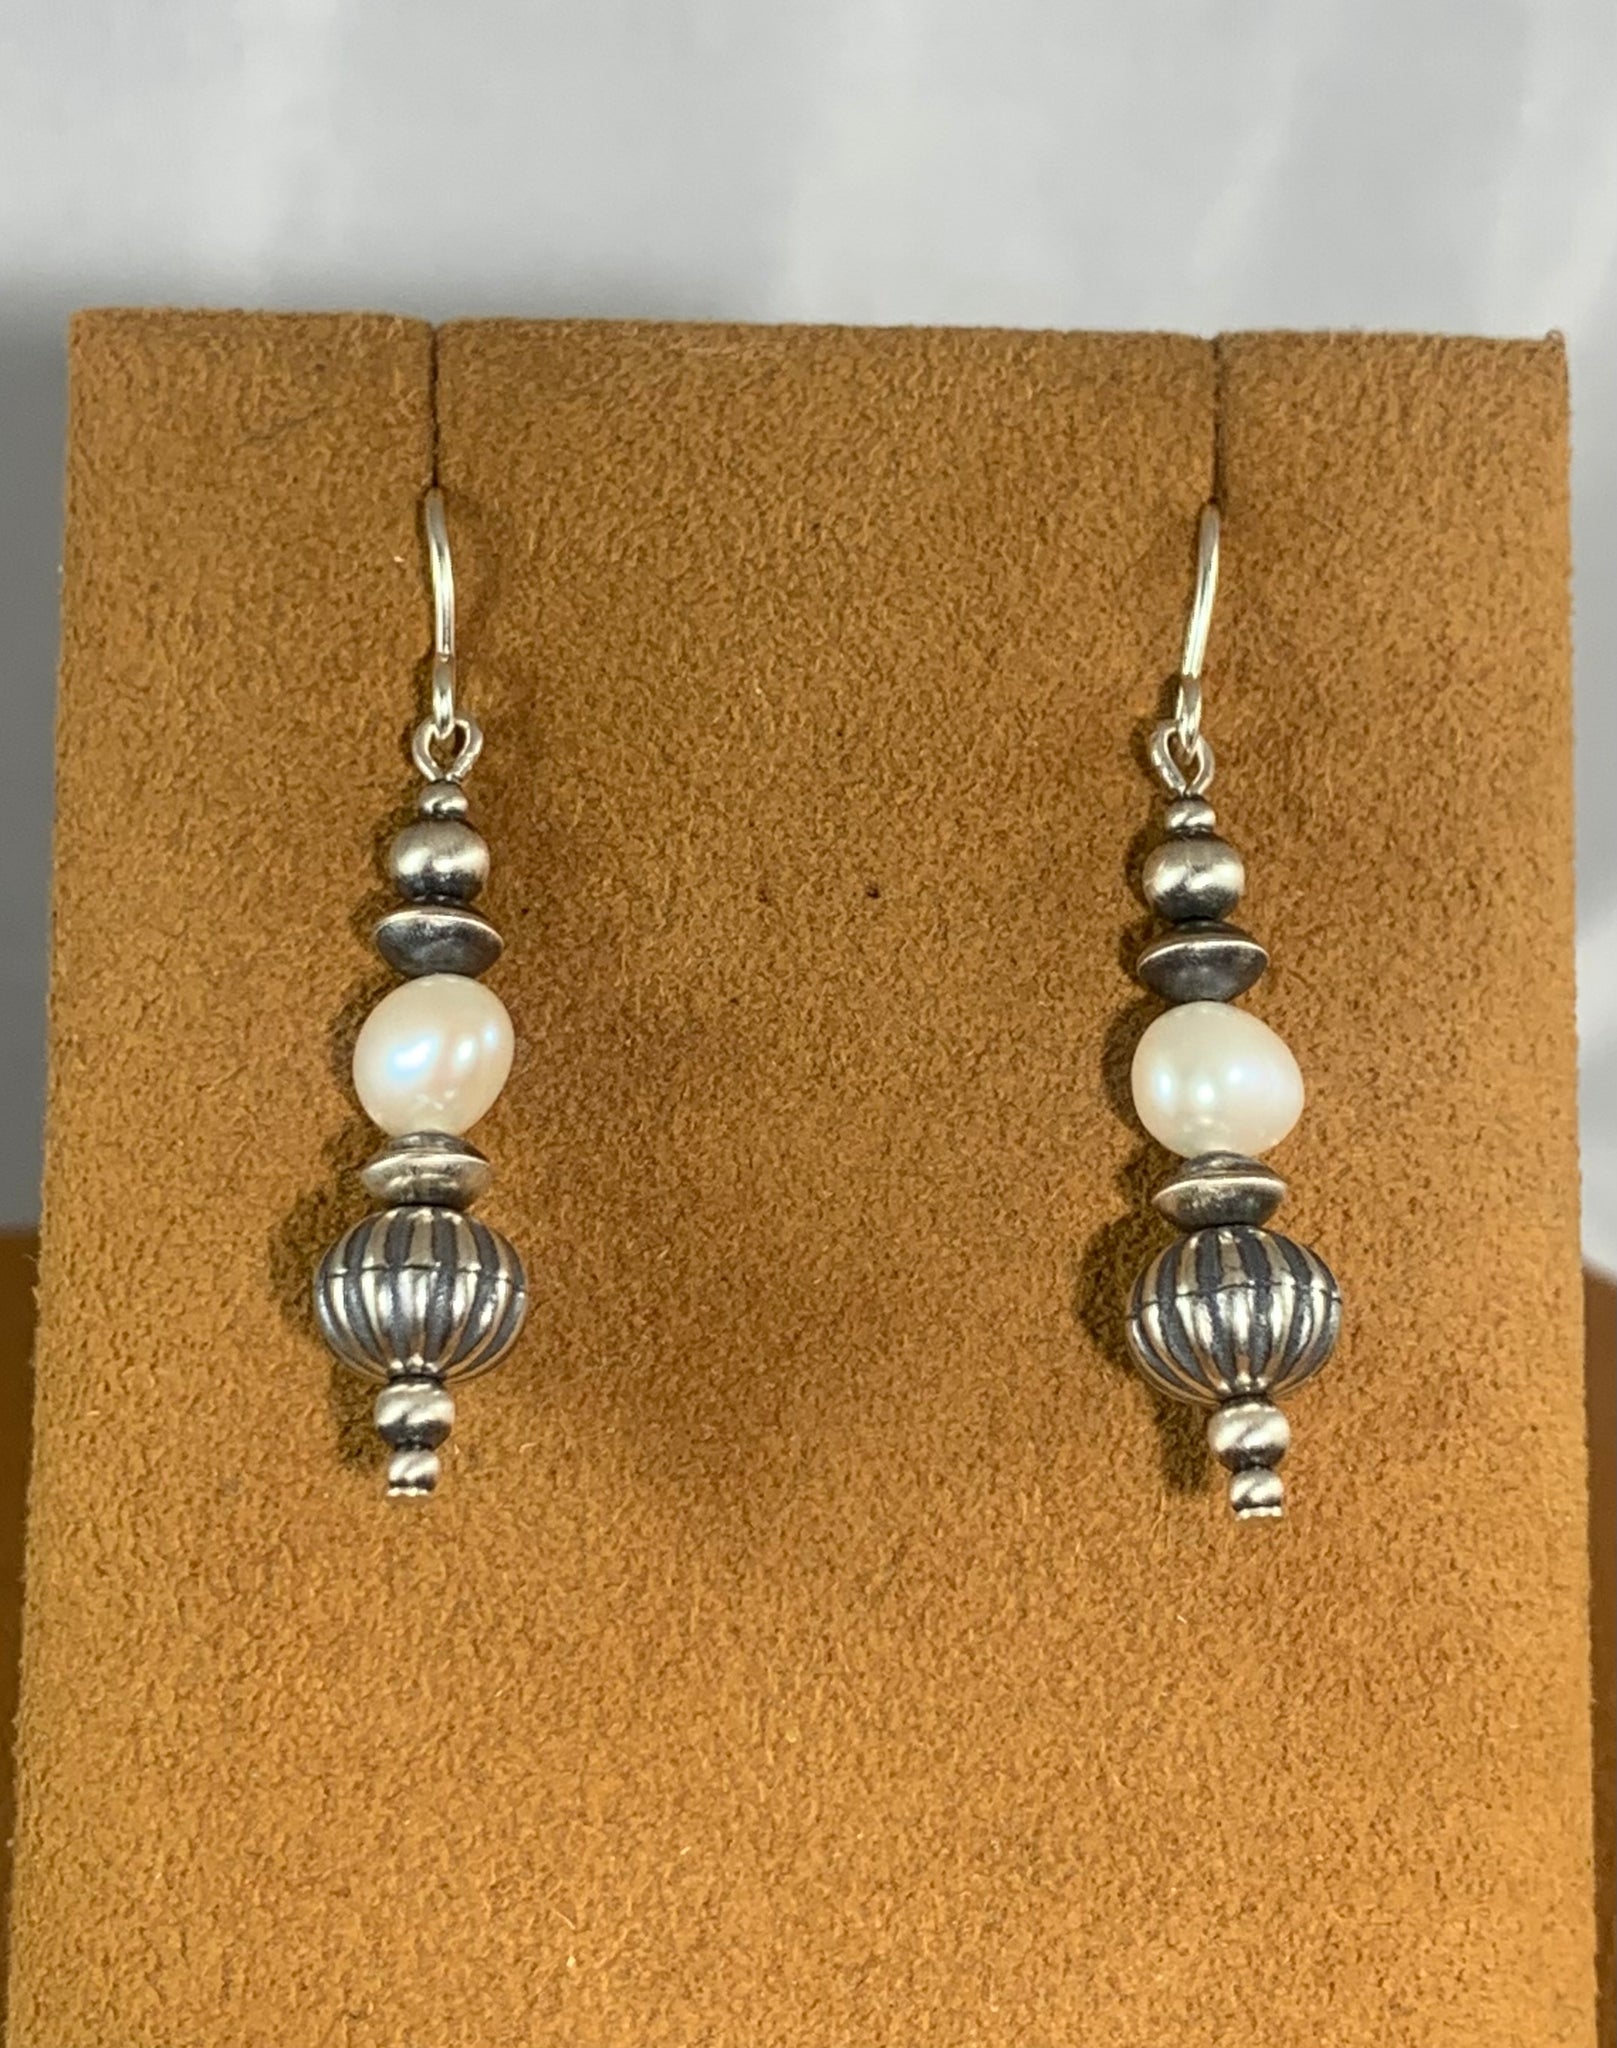 Sterling Silver Bead and Pearl Earrings by Kevin Randall Studios